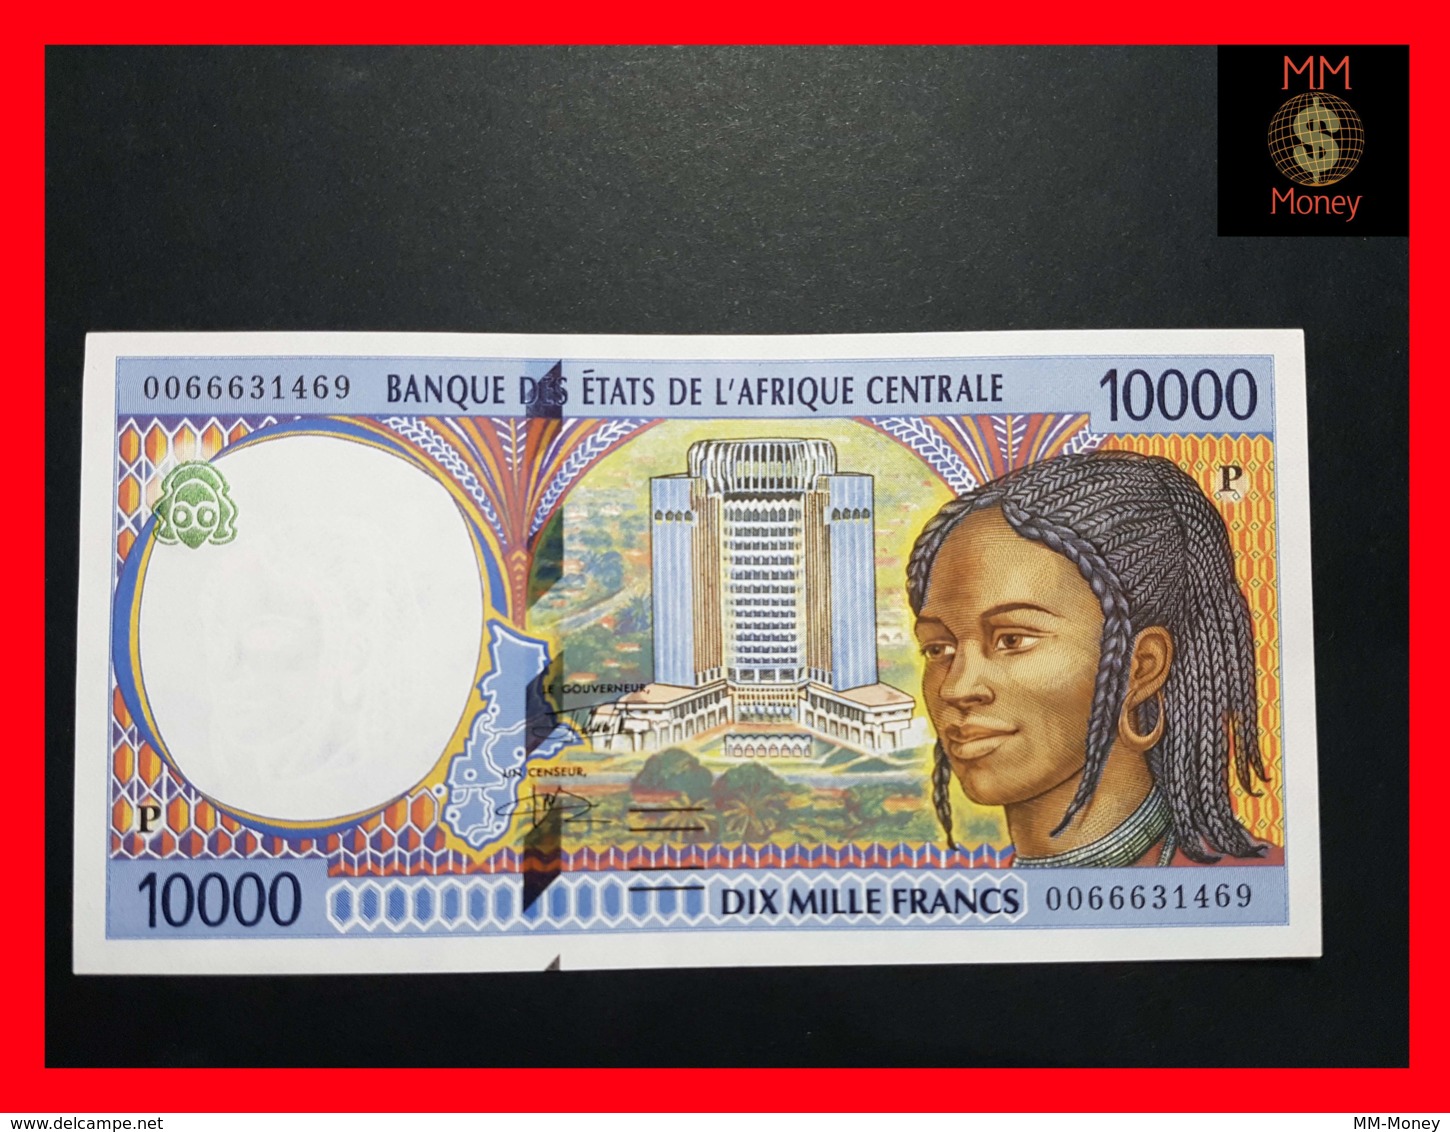 CENTRAL AFRICAN STATES  "P"  CHAD 10.000 10000 Francs 2000  P. 605 P F  AUNC - Zentralafrikanische Staaten